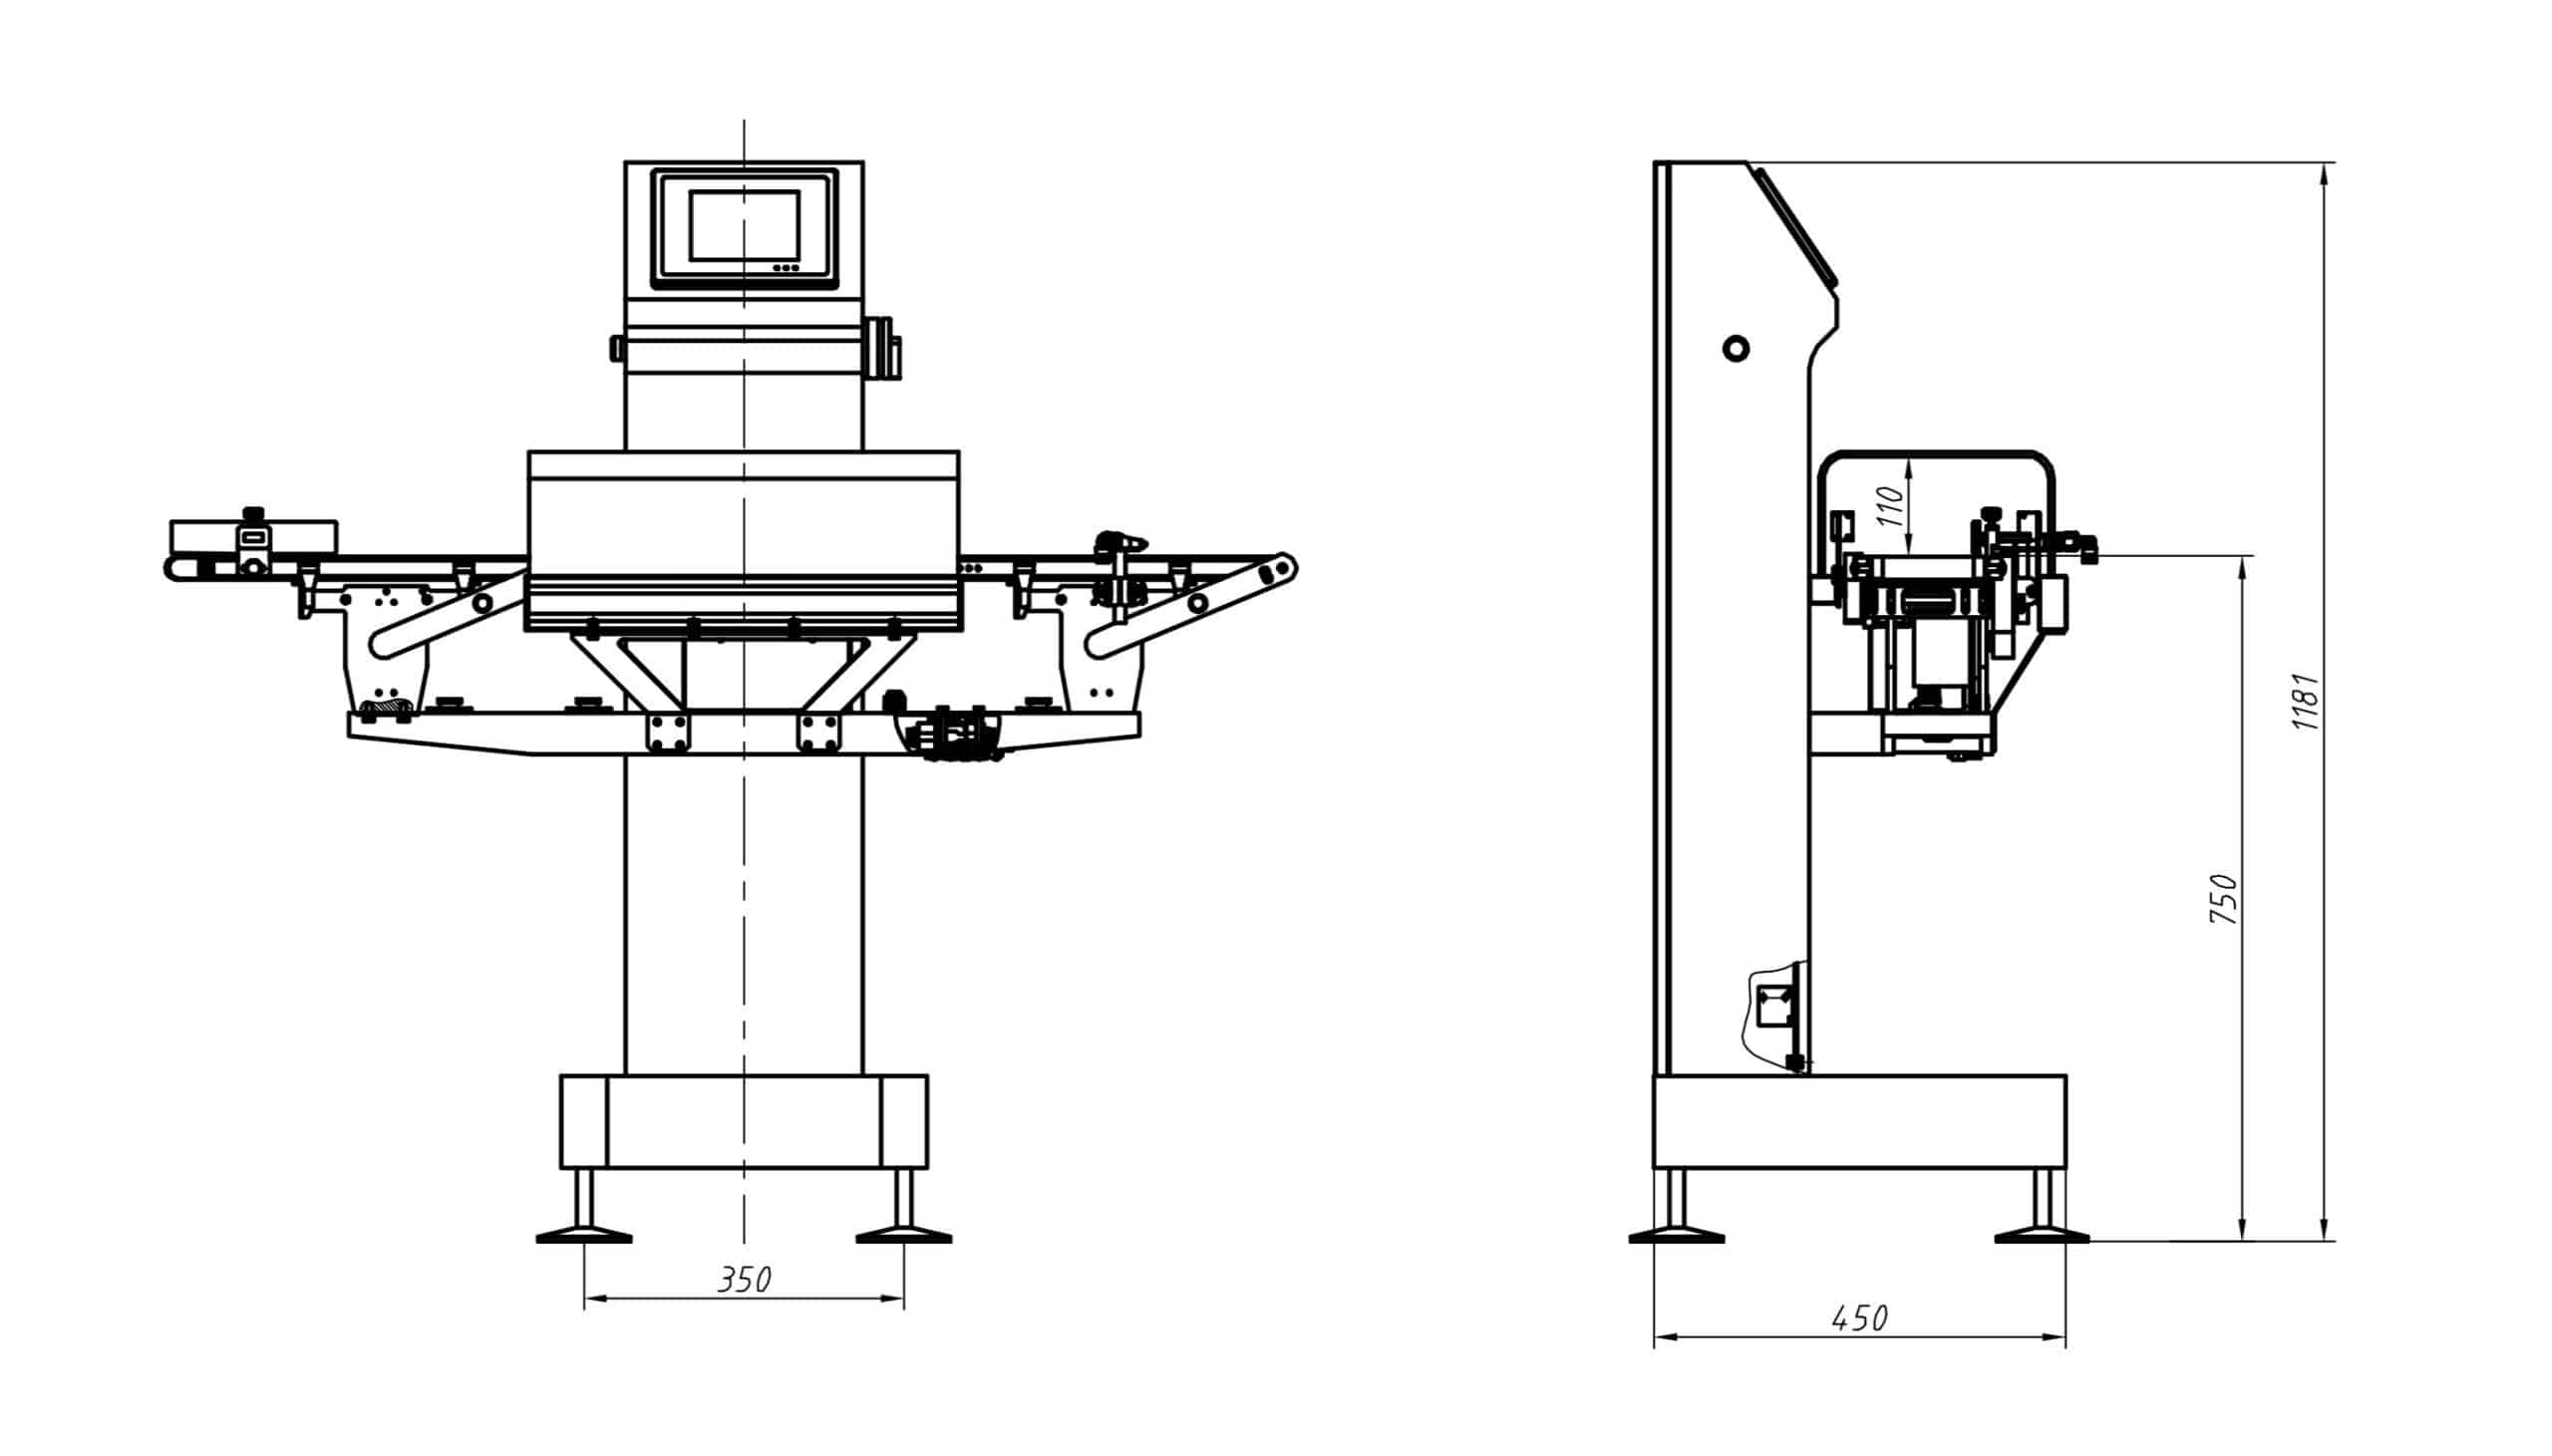 CW200 Check Weigher Layout Drawing